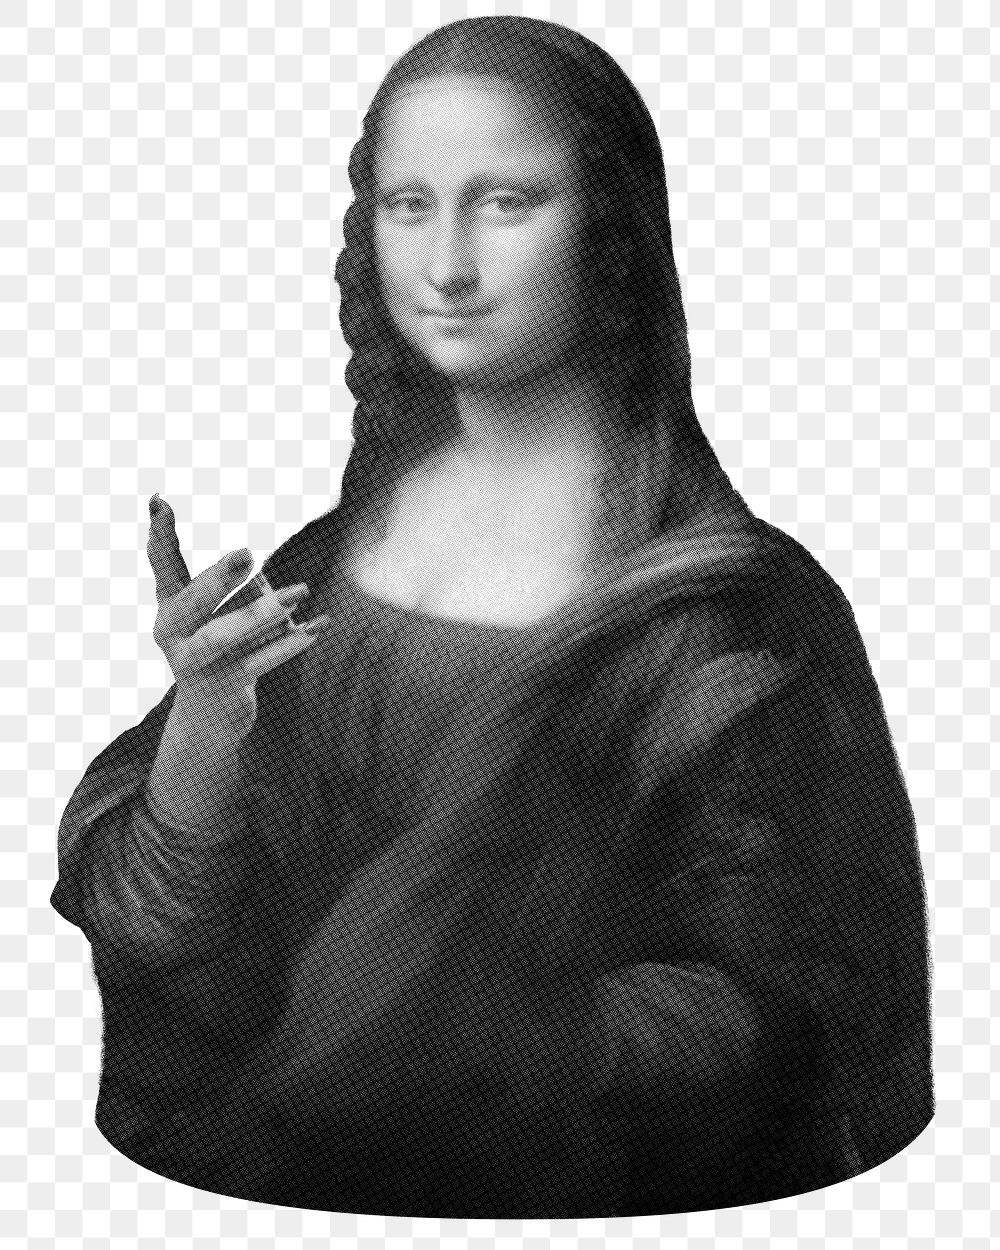 Mona Lisa png greyscale sticker, Da Vinci's famous artwork, remixed by rawpixel, transparent background